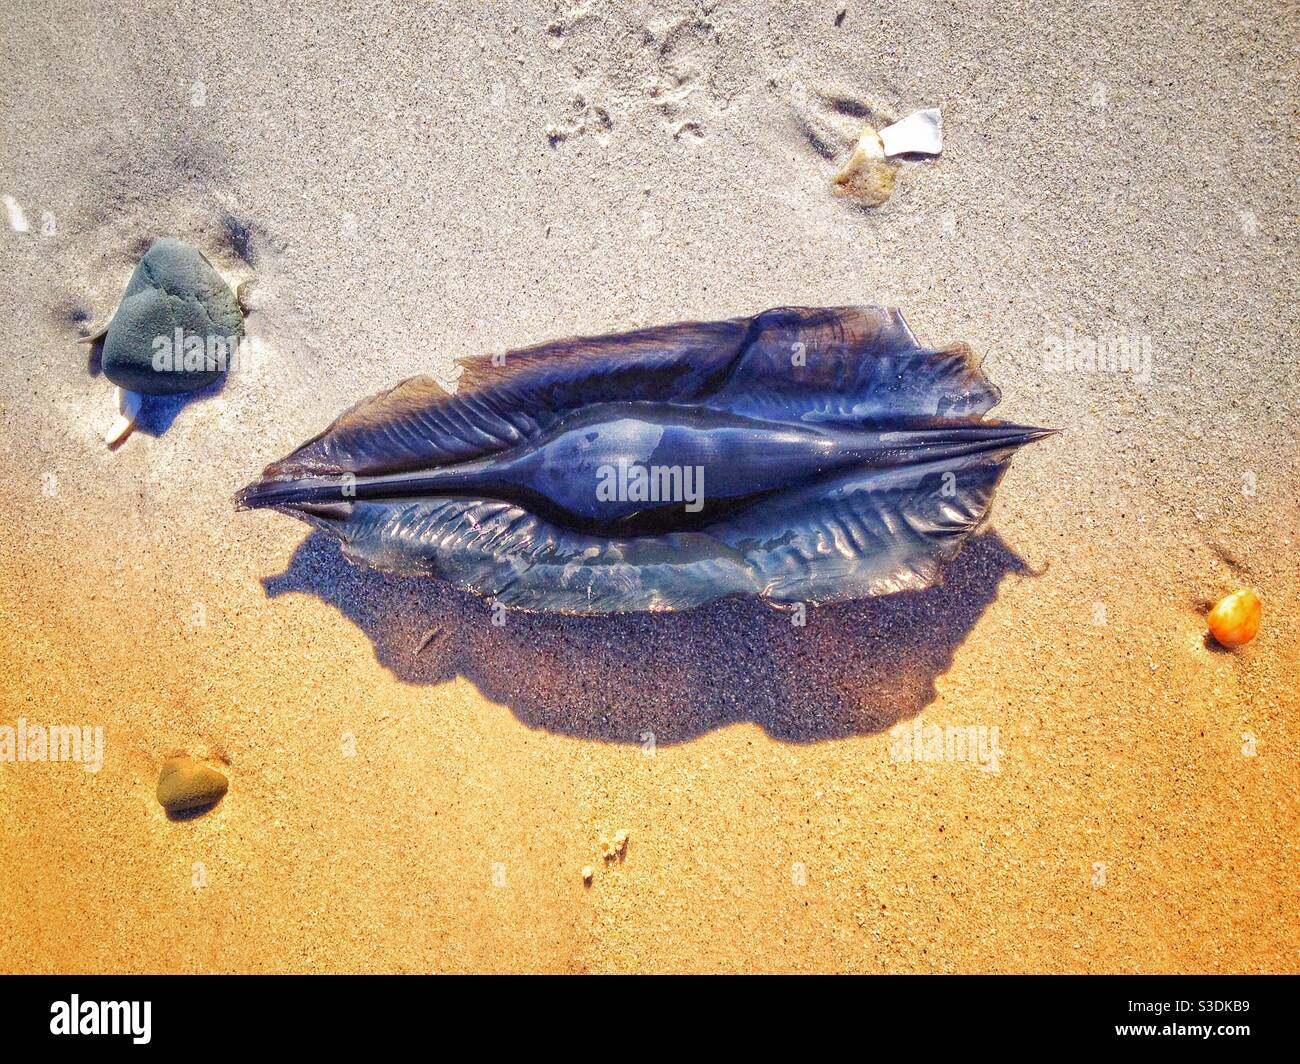 Mermaid's purse on a beach in Cape Town Stock Photo - Alamy